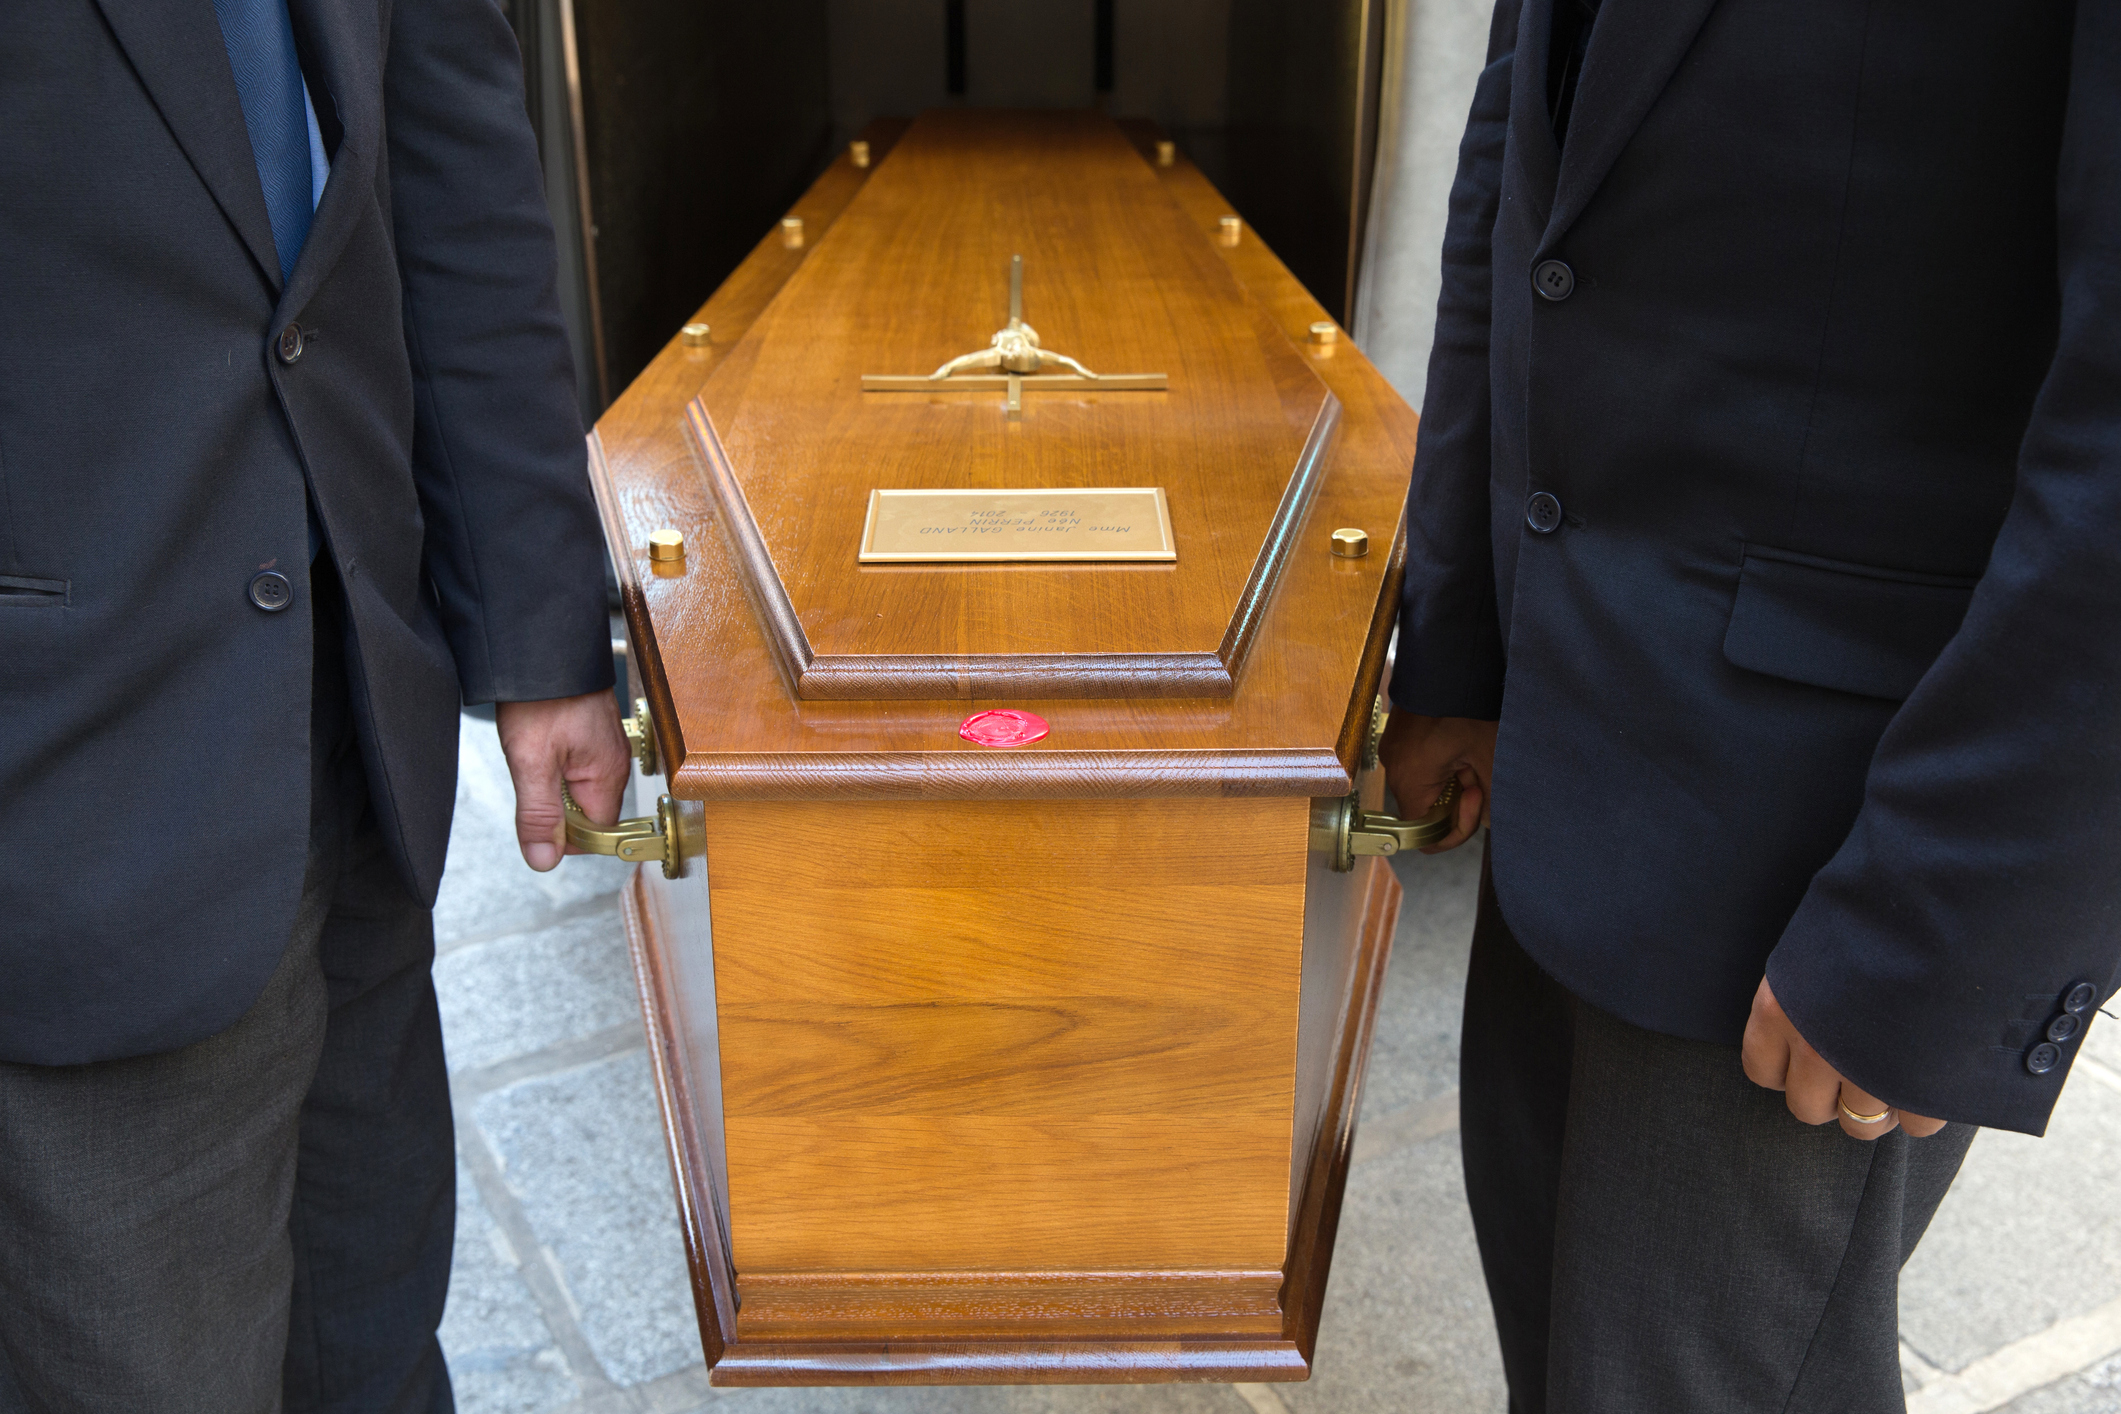 Two pallbearers in dark suits carry a coffin in a close-up photo